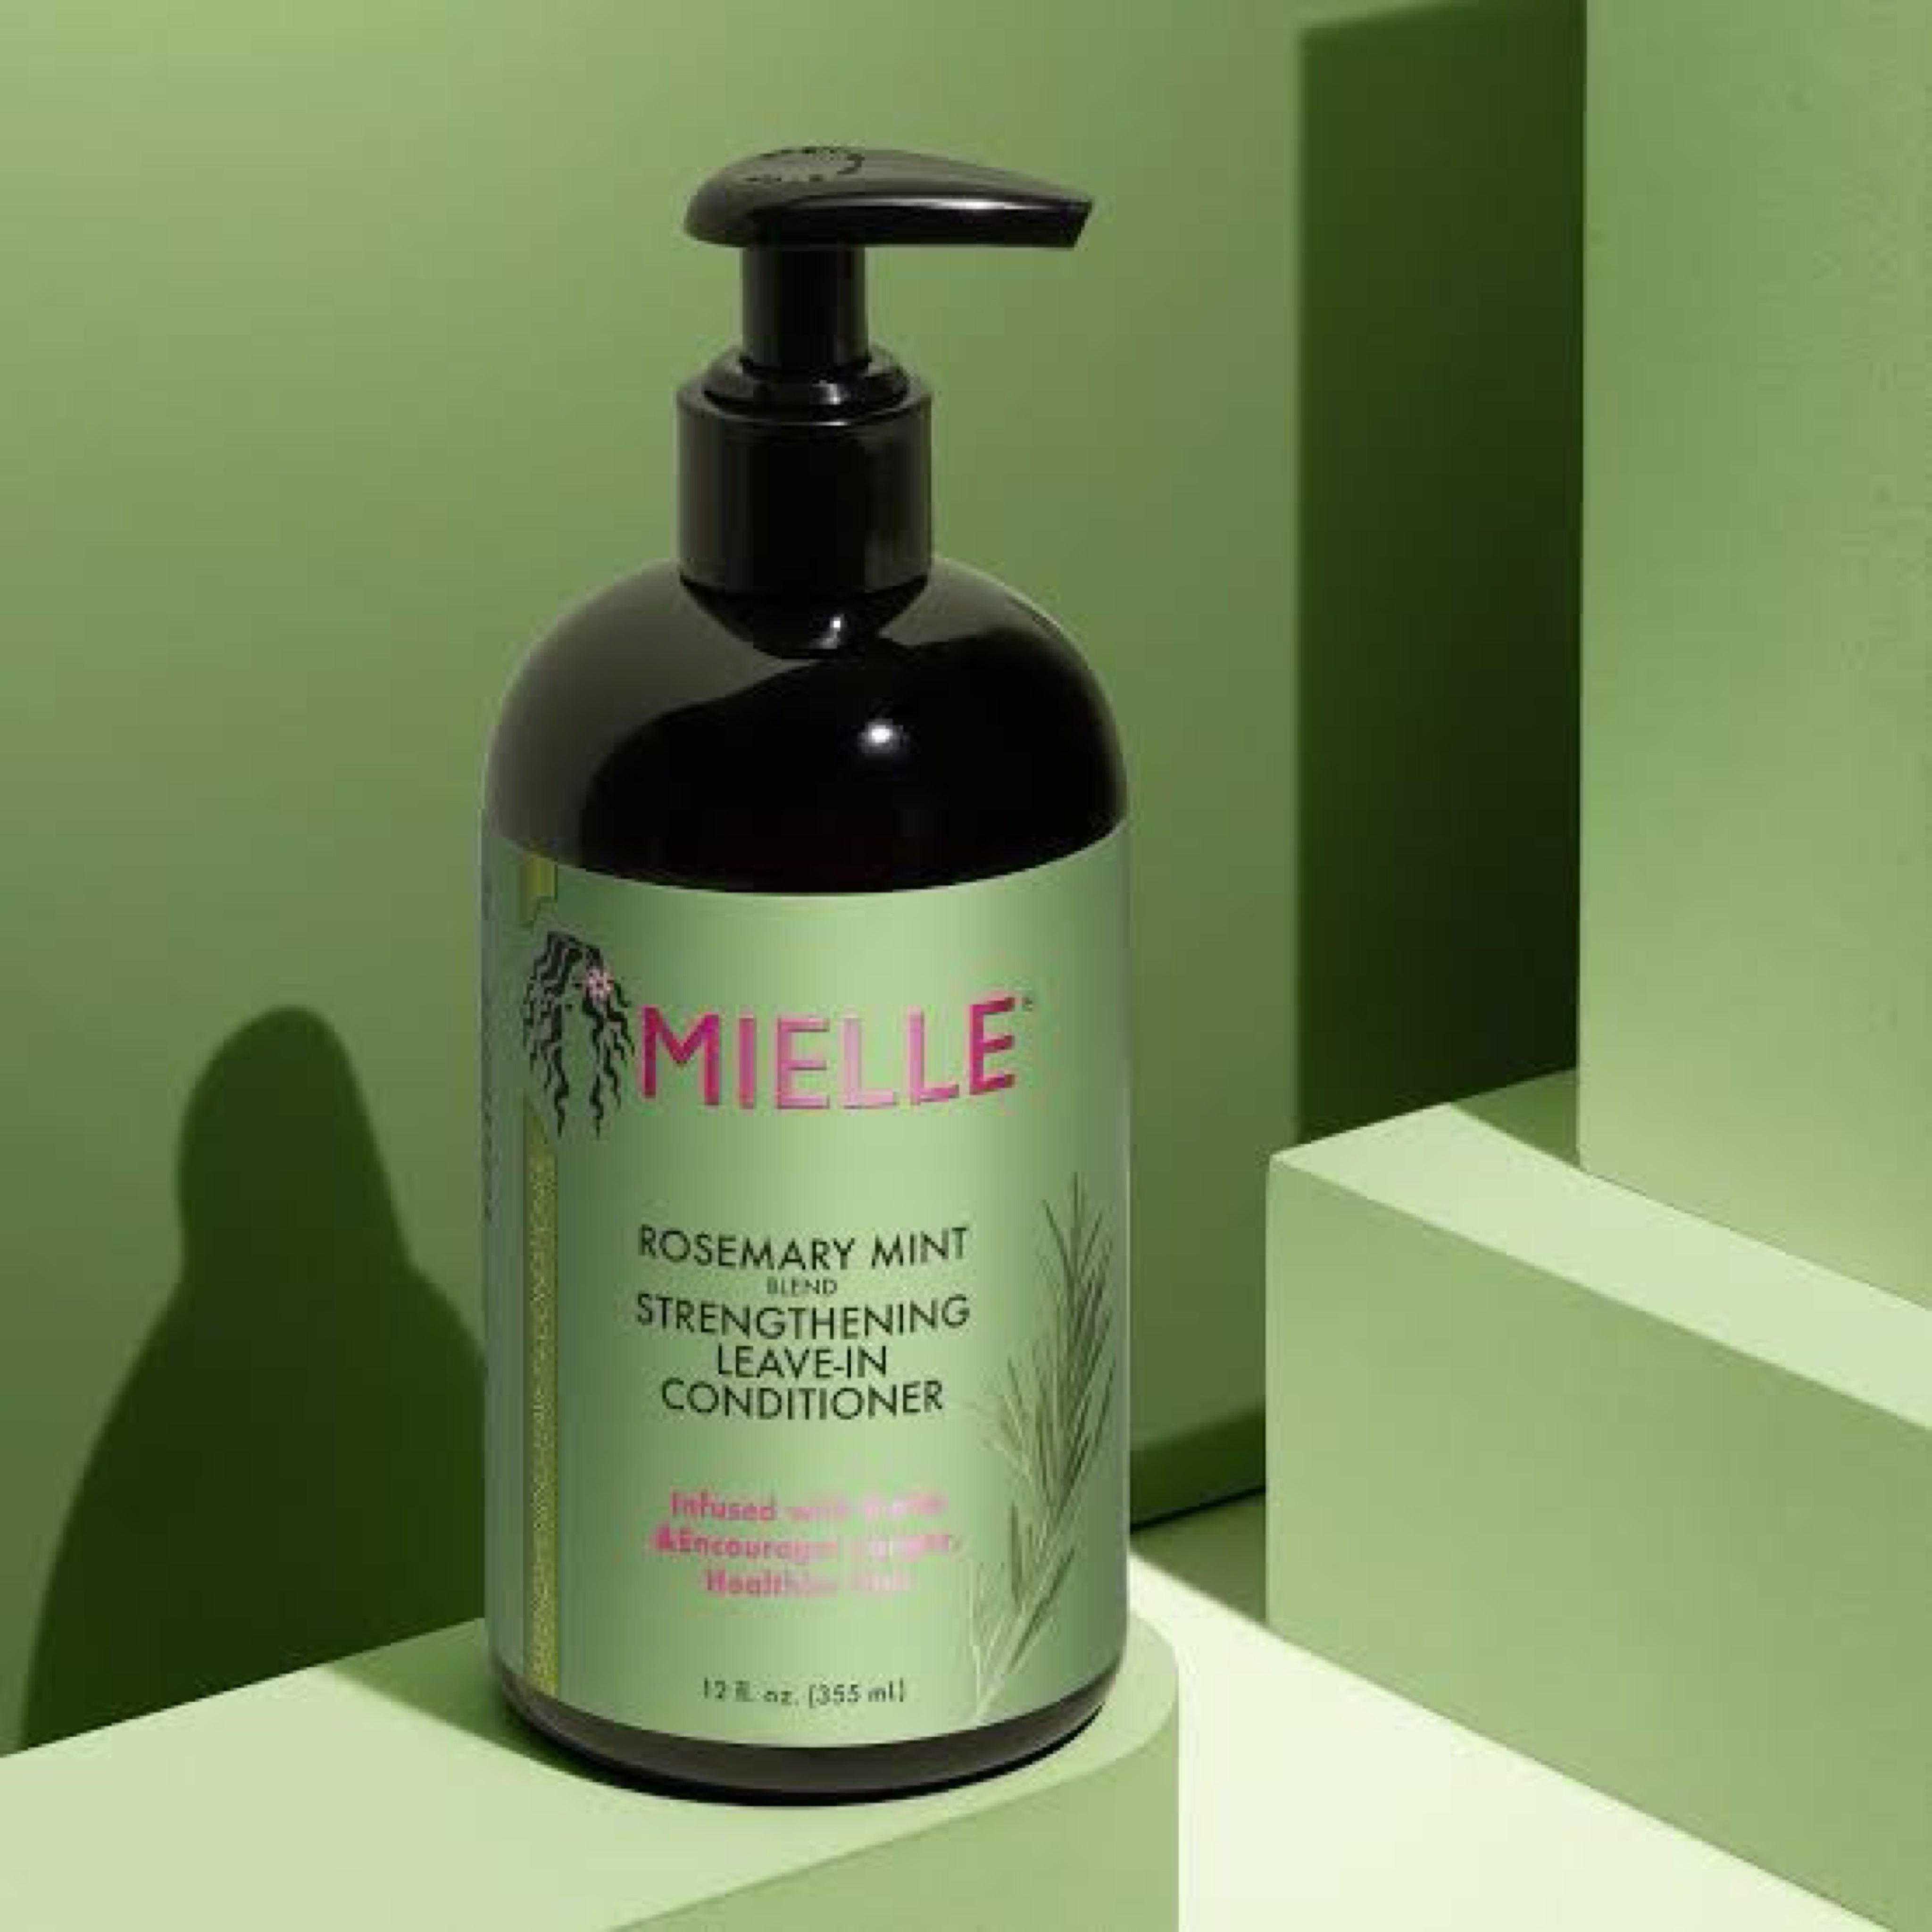 Mielle Rosemary Mint Strengthening Leave- In Conditioner